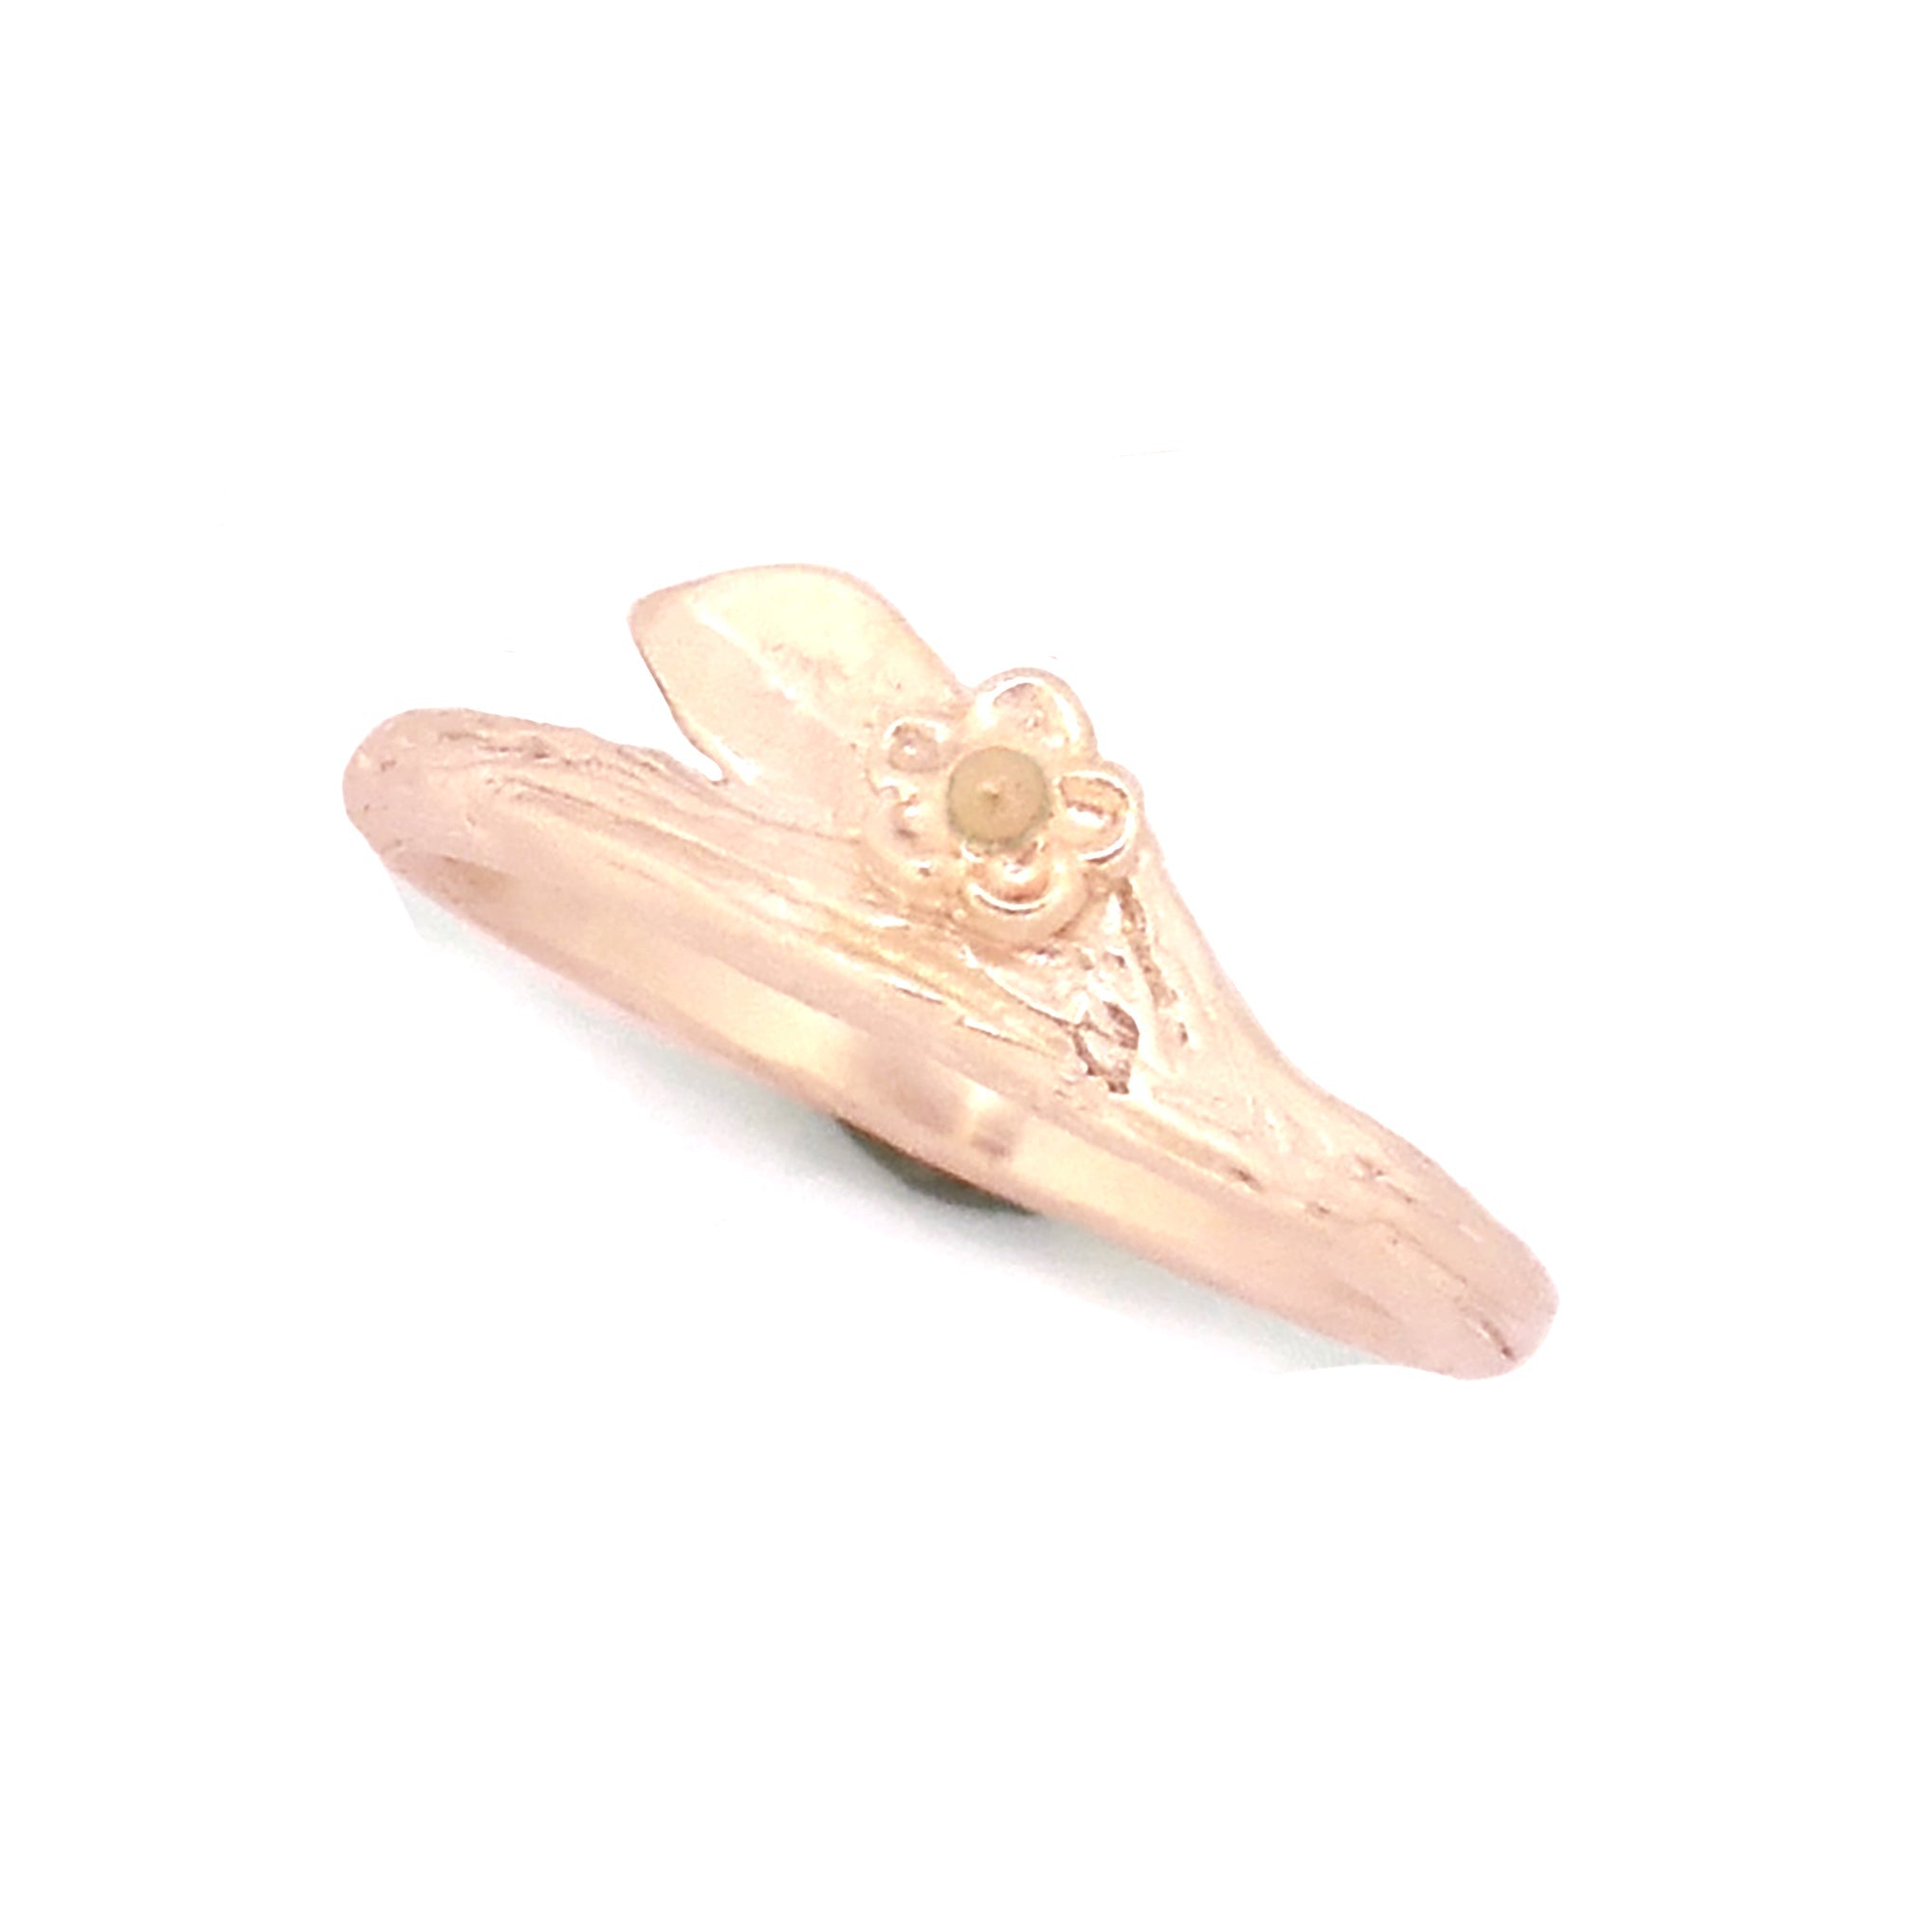 Gold Spring Twig Ring - your choice of gold - Wedding Ring 18K Palladium White Gold 14K Rose Gold 3909 - handmade by Beth Millner Jewelry